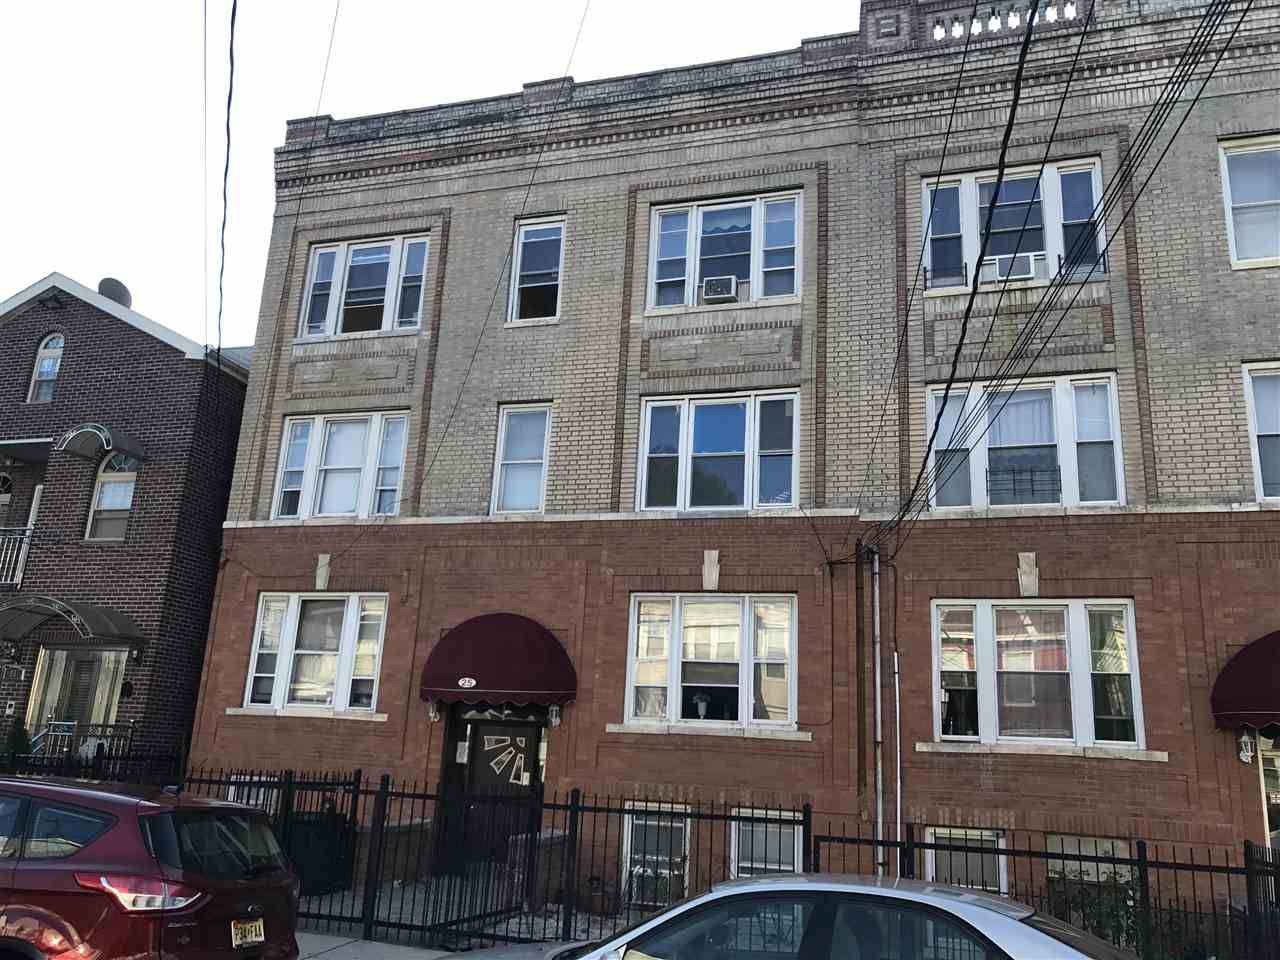 Bright 2bed 1 bath in the heard of Journal Square - 2 BR Journal Square New Jersey